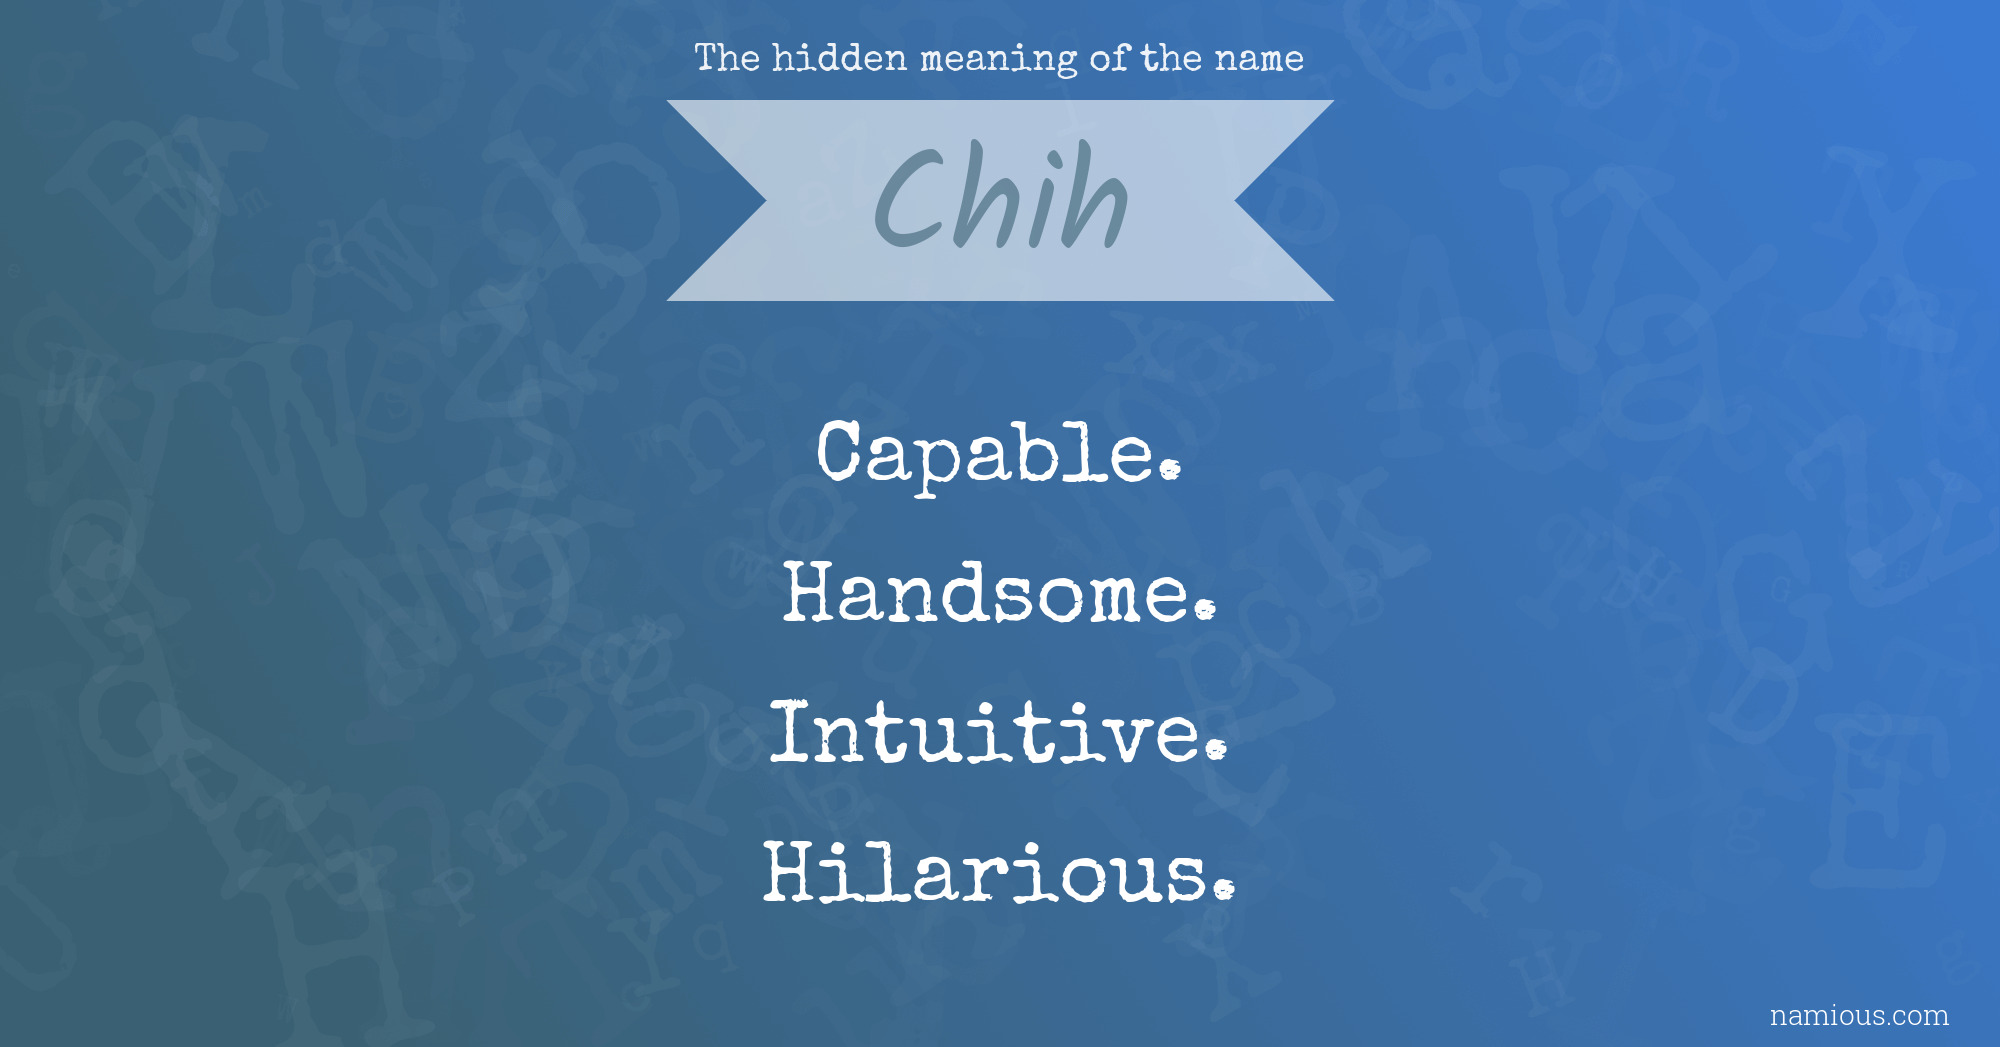 The hidden meaning of the name Chih